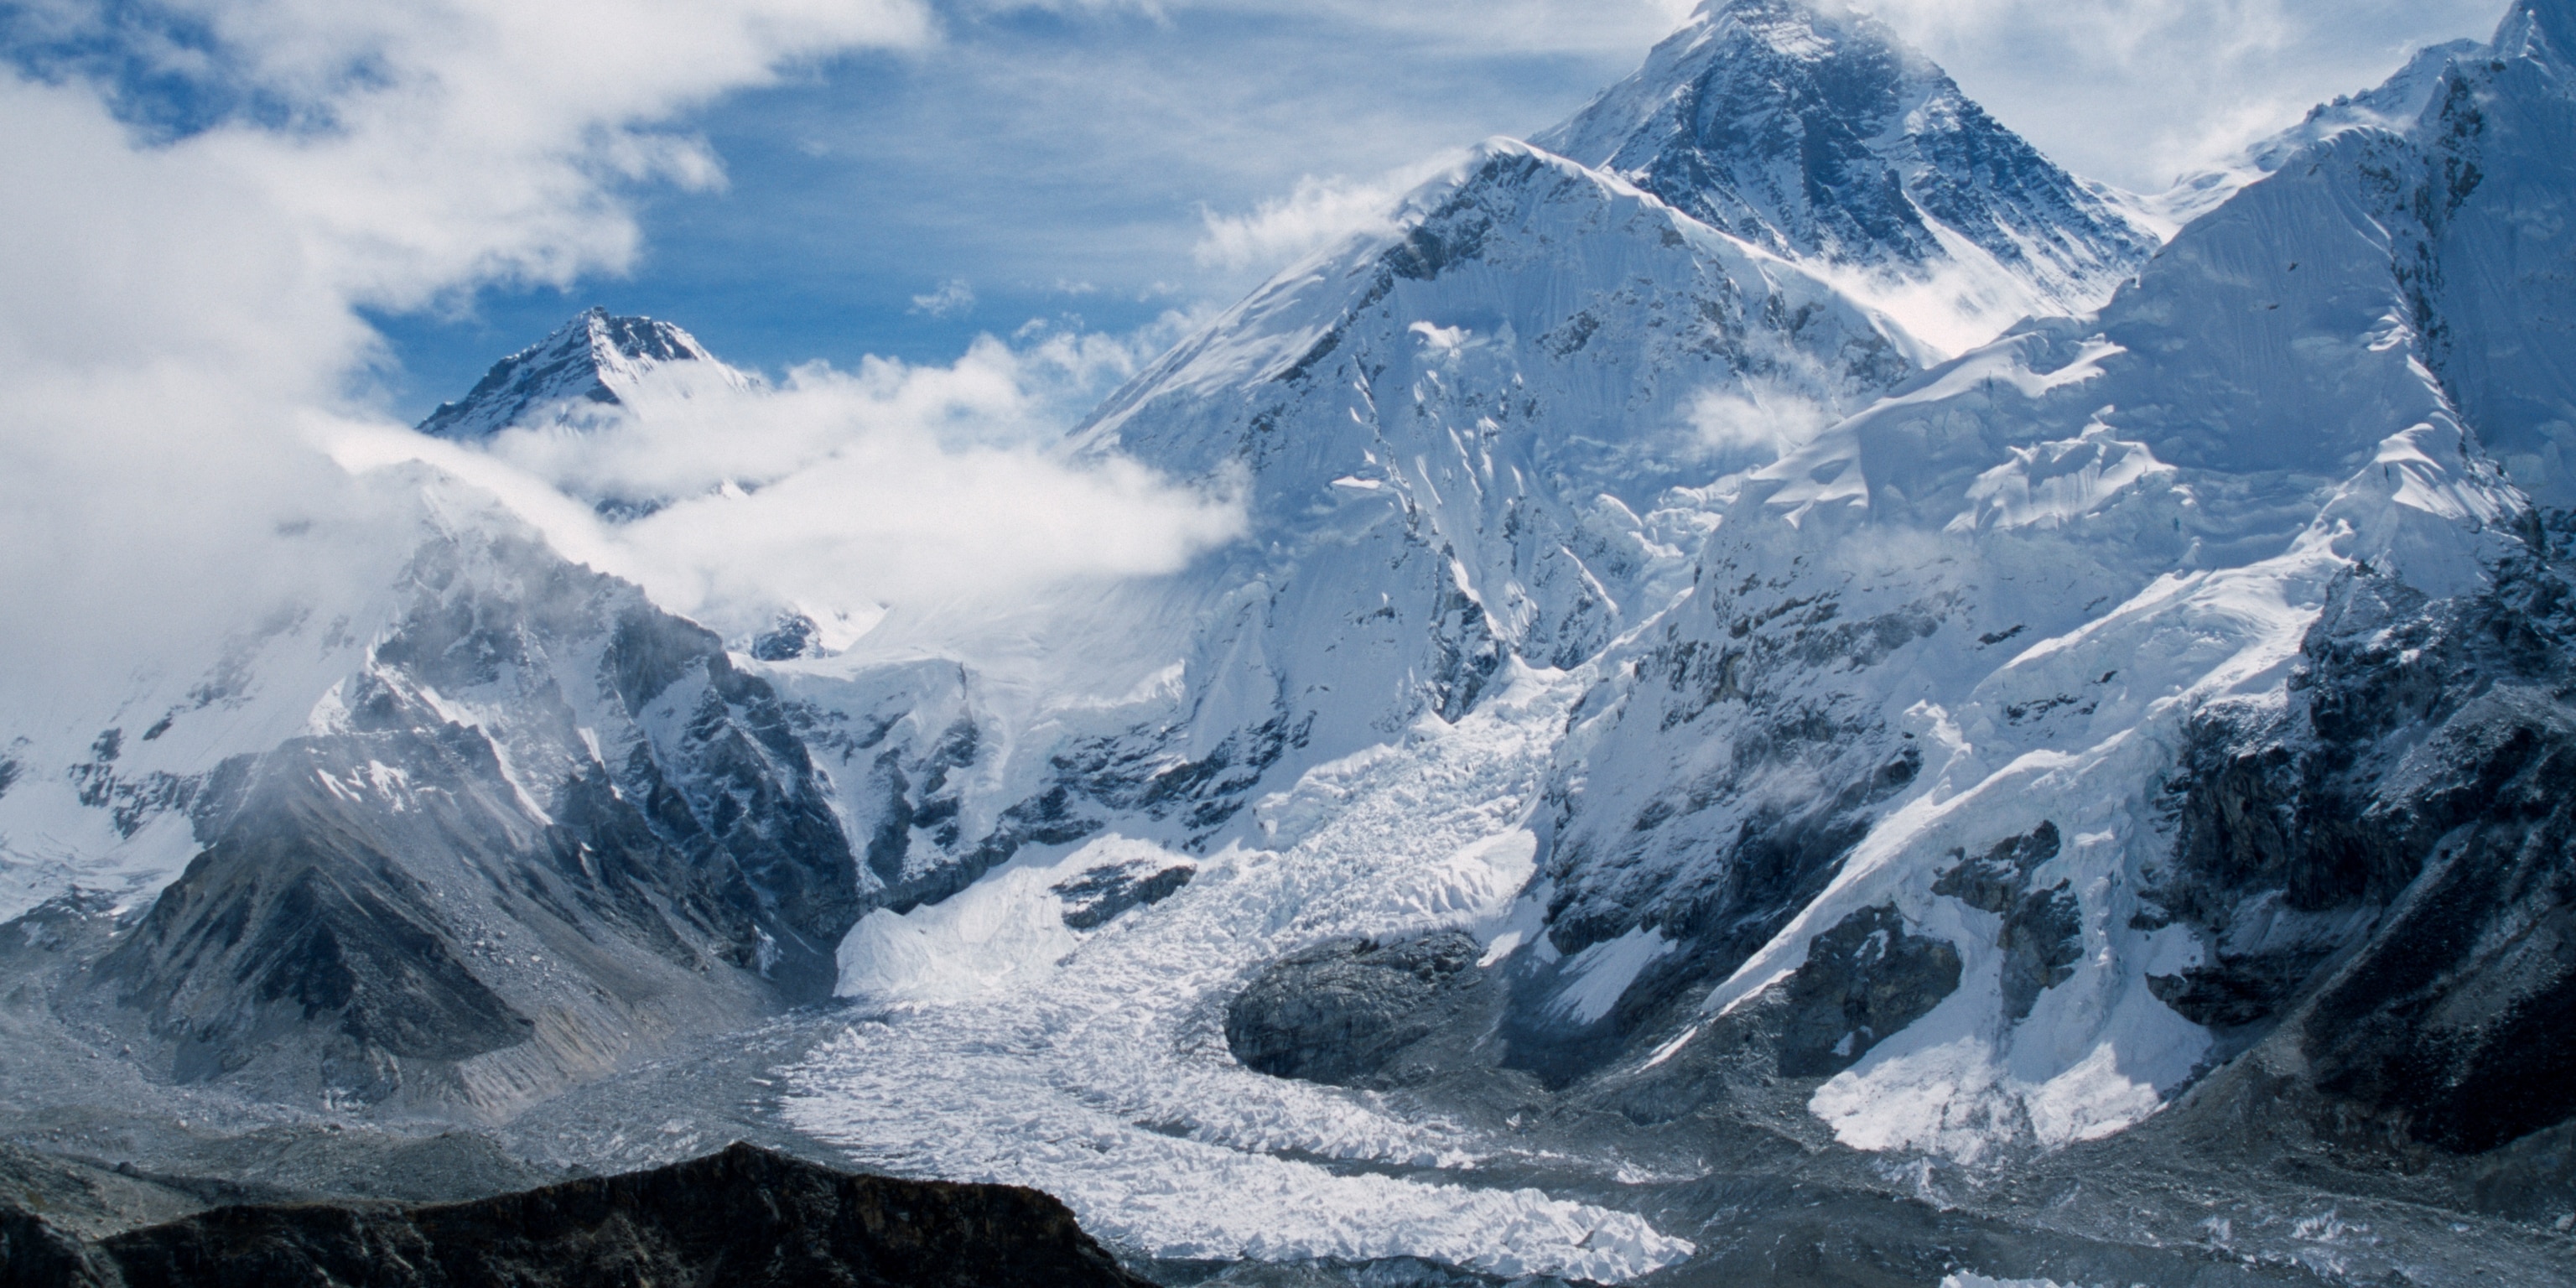 Conflicting Reports on Whether Everest Is Open as Outfitters Pull Out